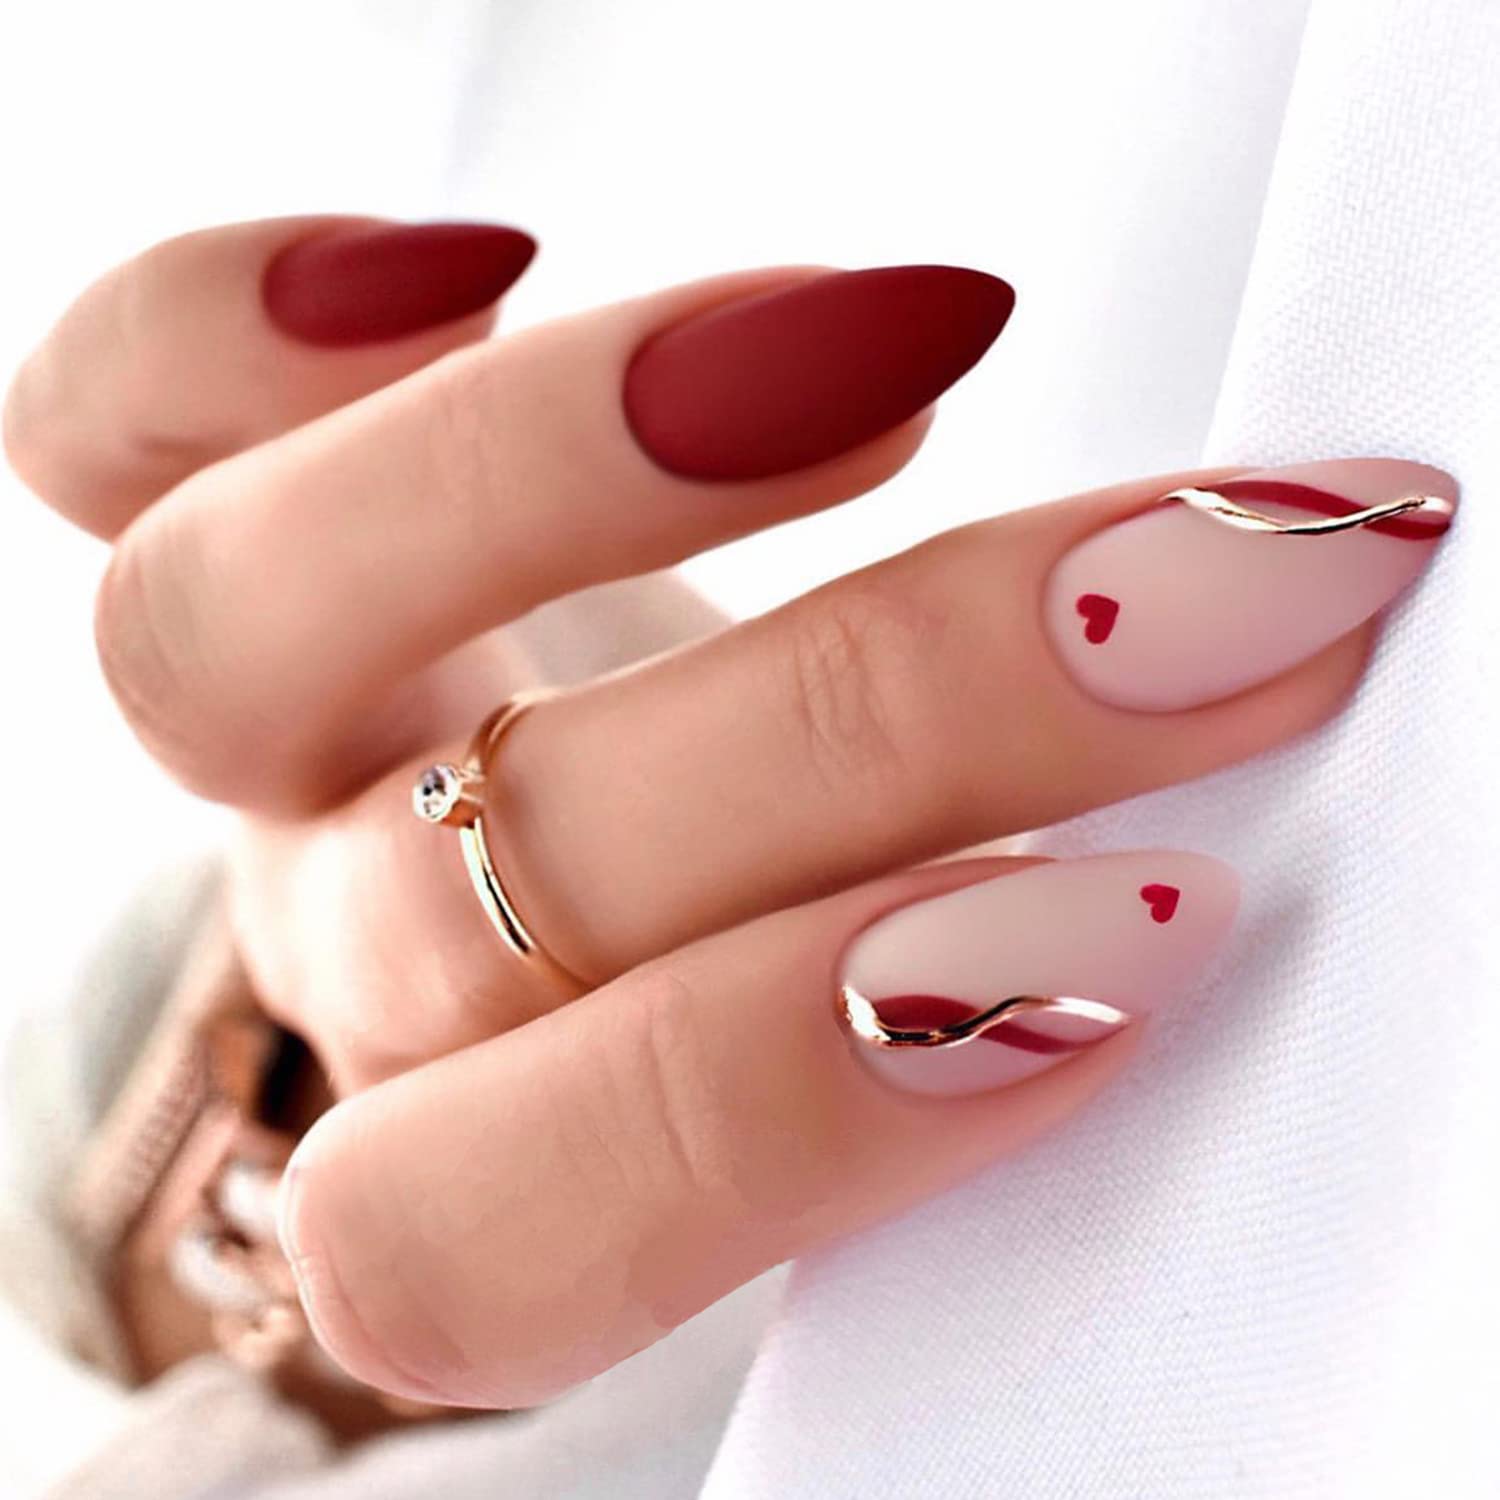 Romantic Nail Art Ideas for Valentine's Day